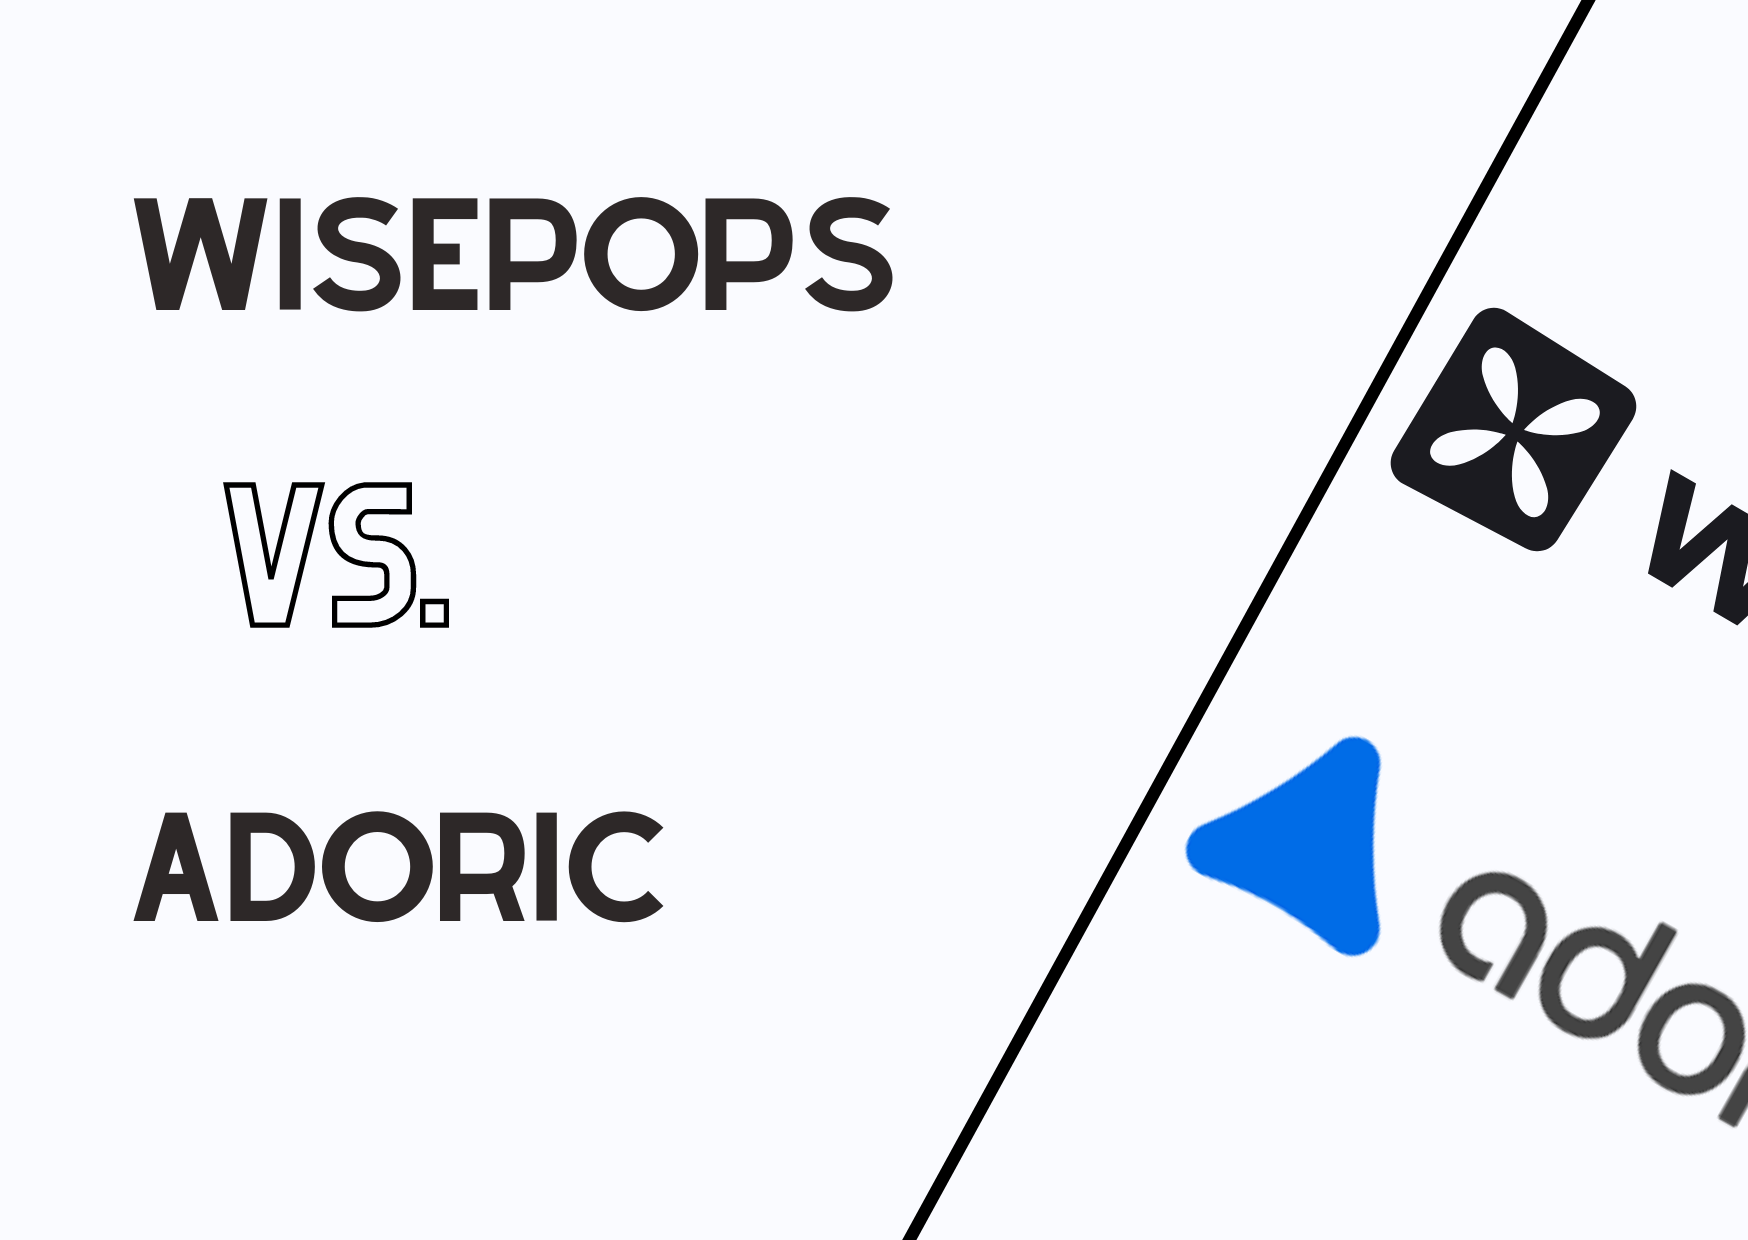 the banner of Wisepops vs Adoric to compare them in details with their top features